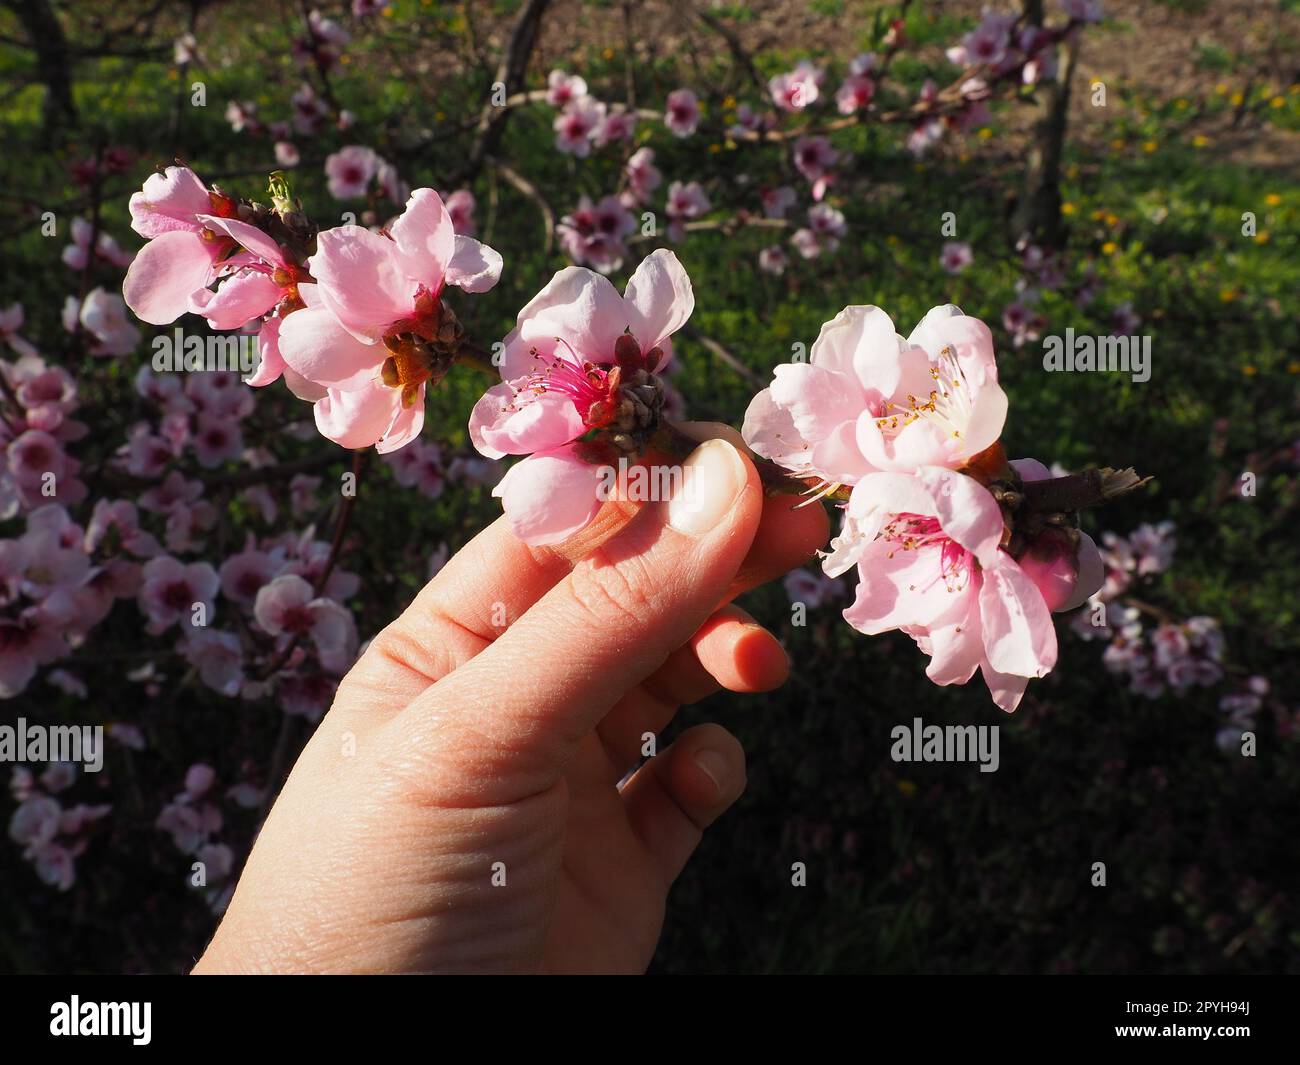 A female hand holds a branch with pink flowers. Pink flowers on the tree. Beautiful wild flowering in the spring garden. Cherry or plum branches with buds. Agriculture and horticulture. Stock Photo